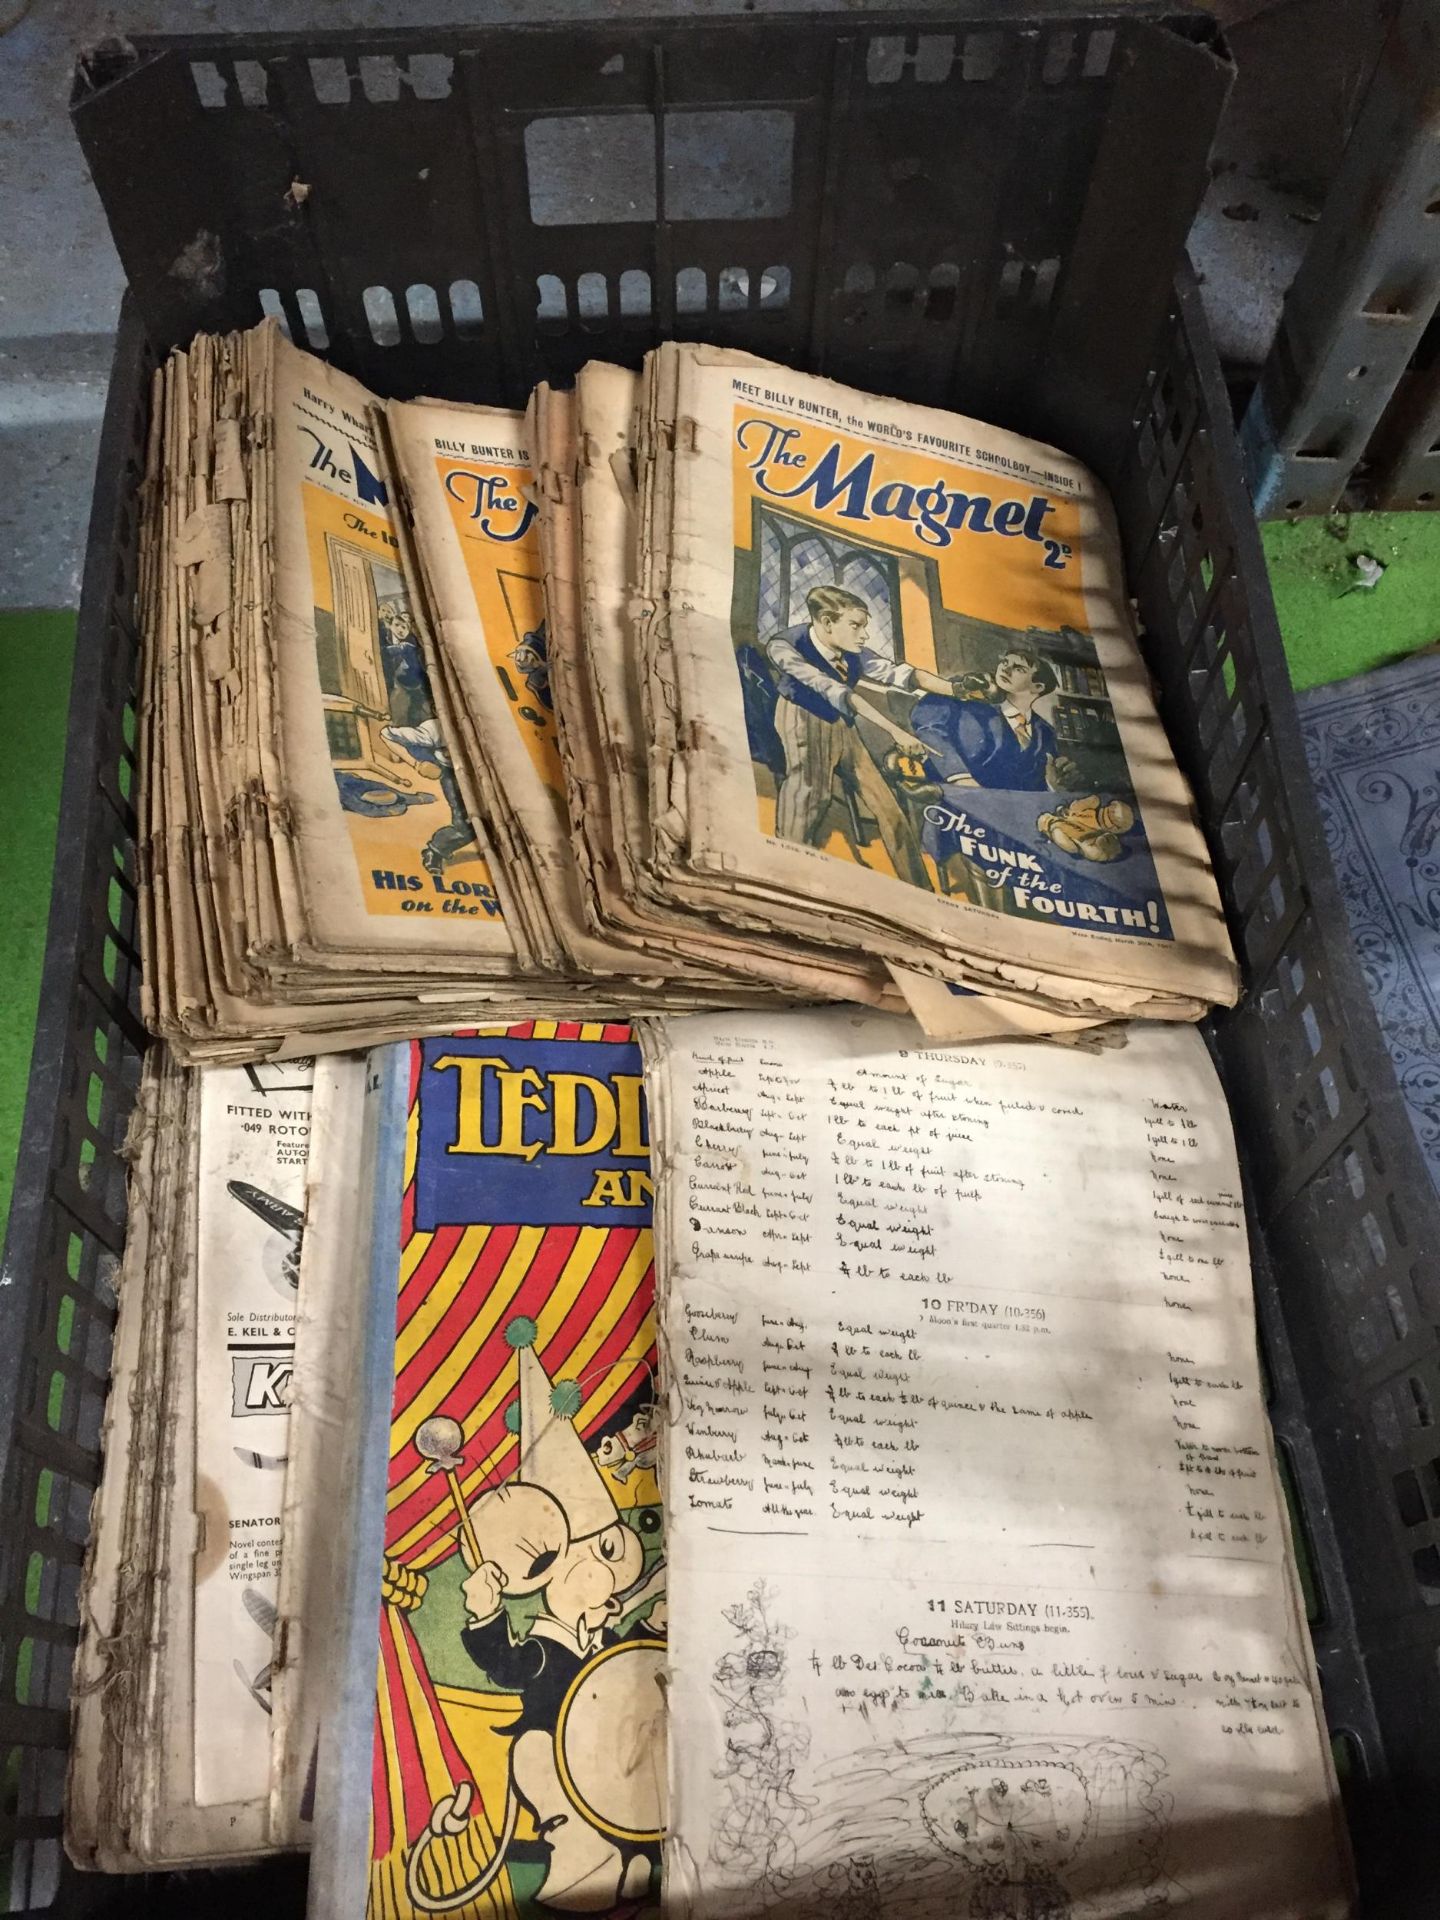 A BUNDLE OF THE MAGNET COMICS WITH BILLY BUNTER TOGETHER WITH A 1934 TEDDY TAILS ANNUAL